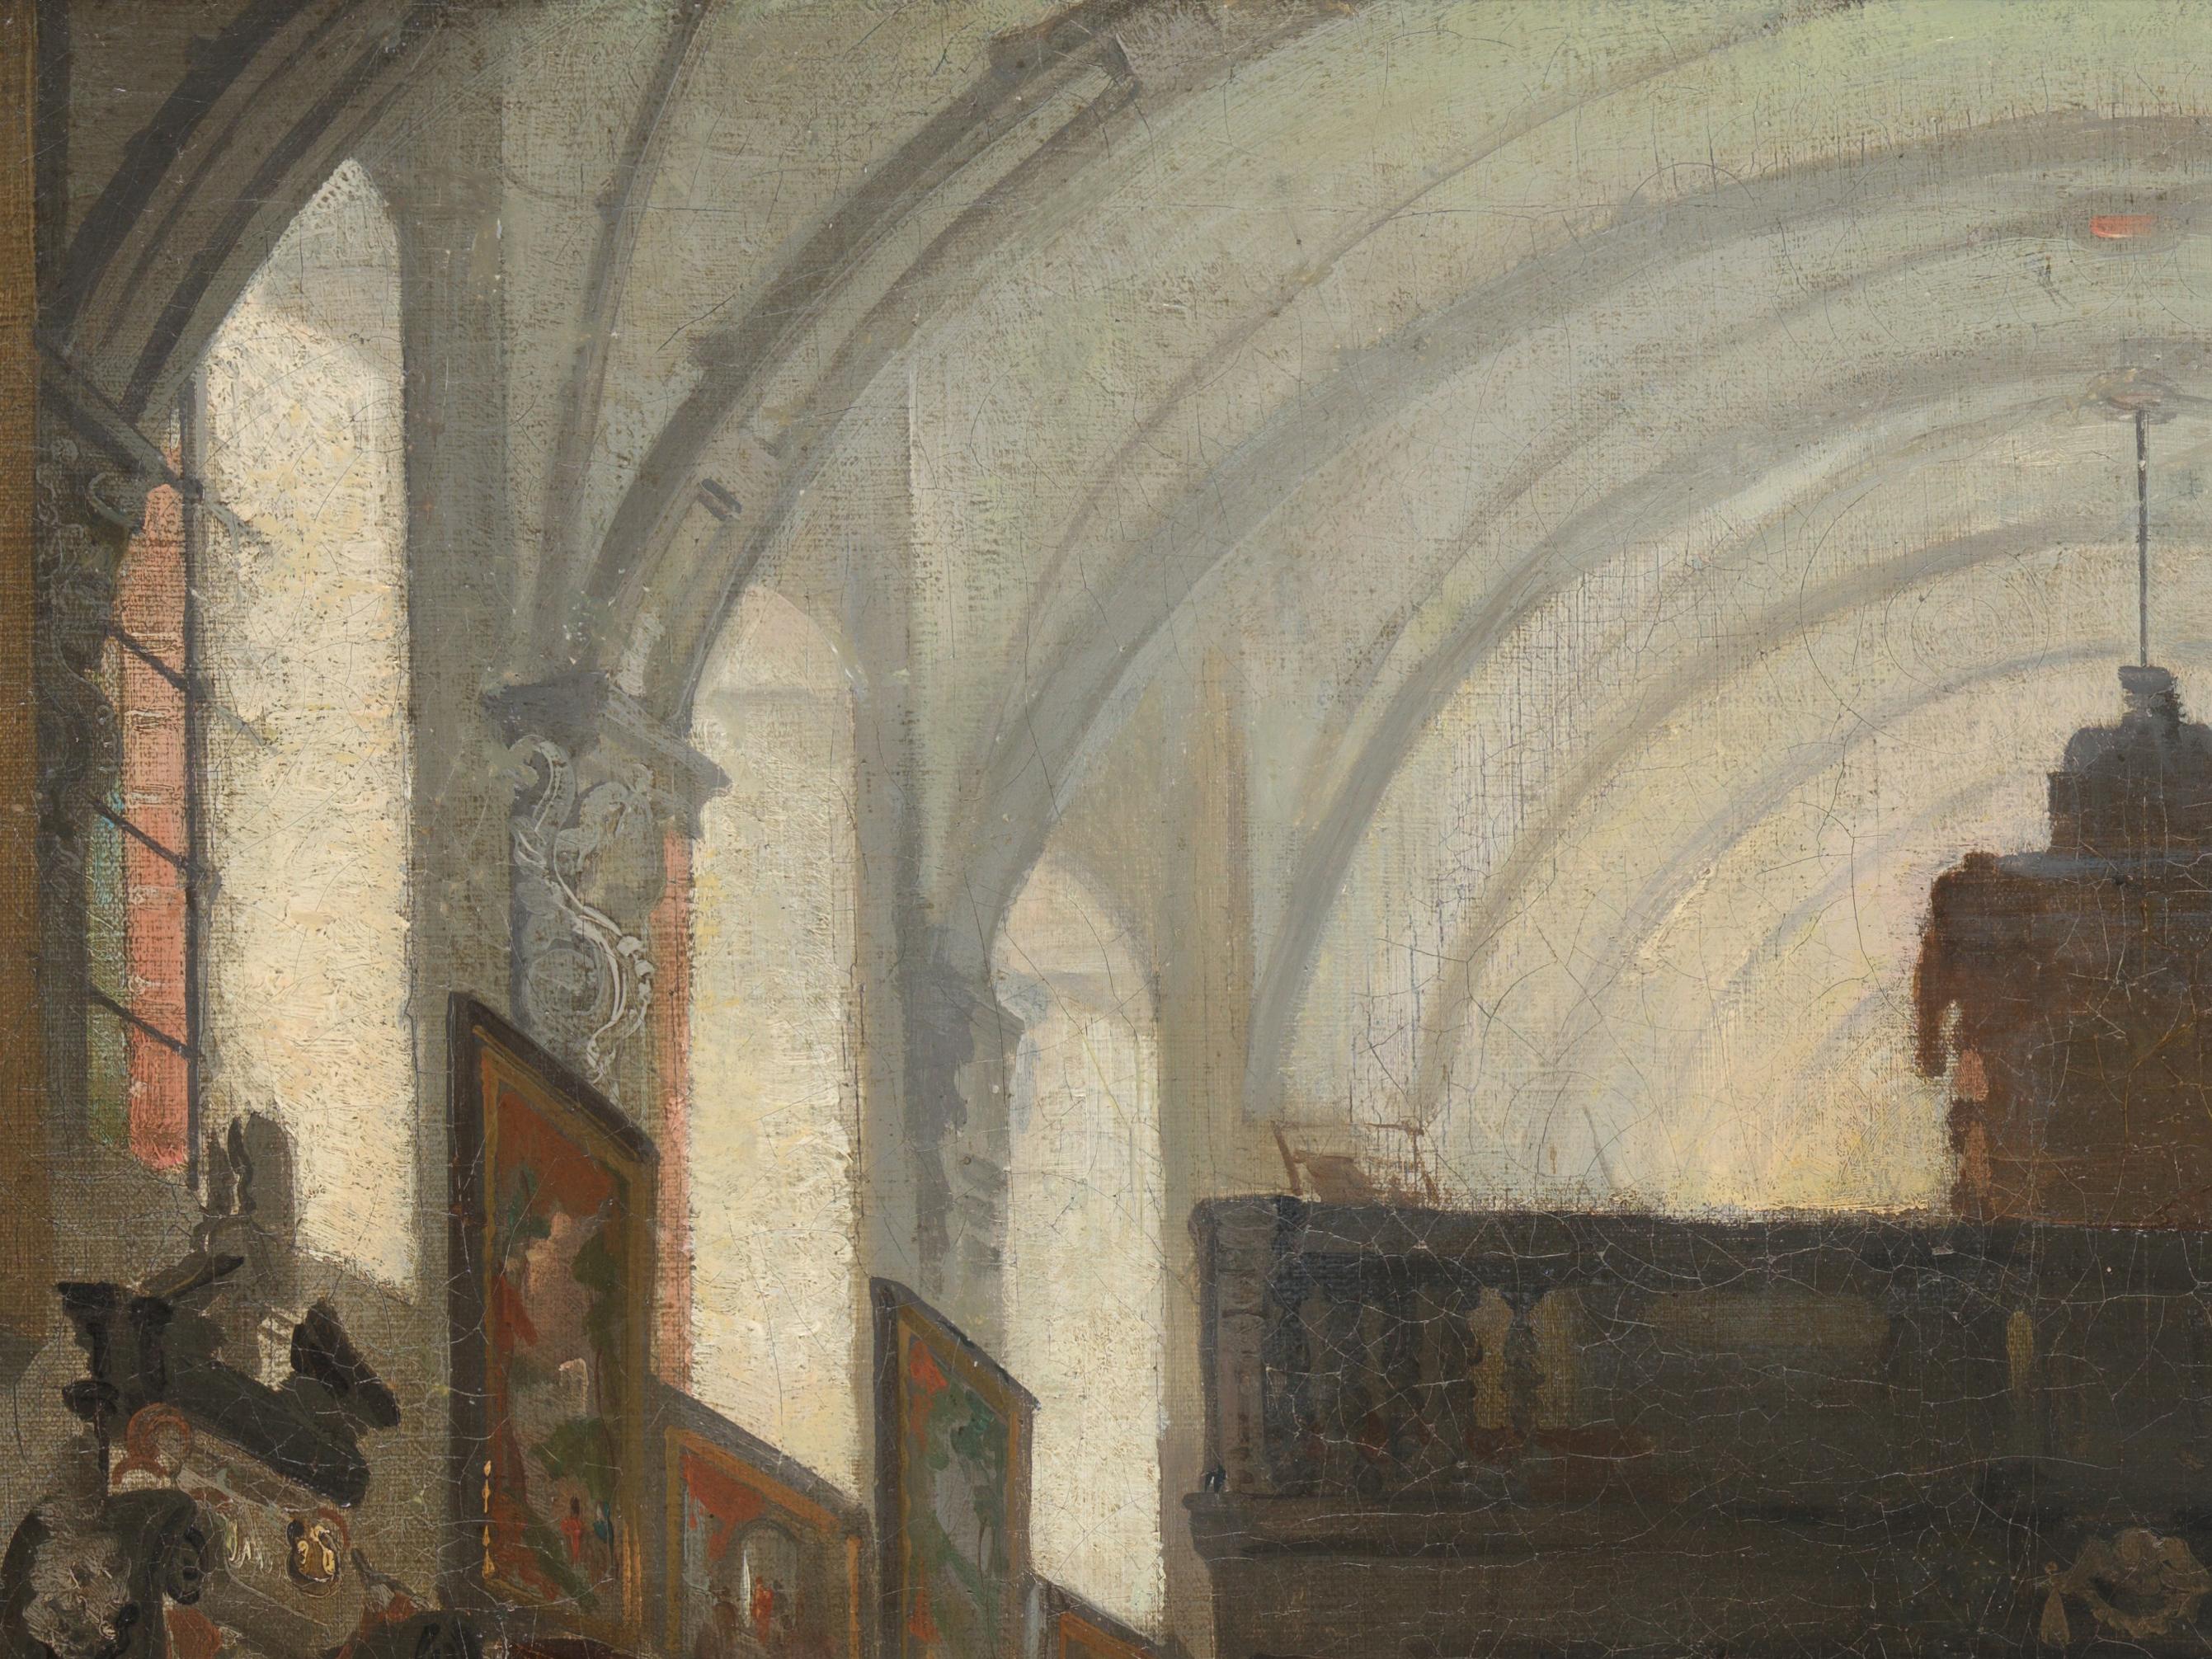 A 17th century Flemish painting of a church interior. The high arches of the church ceiling are painted in light grey and become less clear as they become more distant, the spots where the sun hits the ceiling are painted with a yellowish undertone.